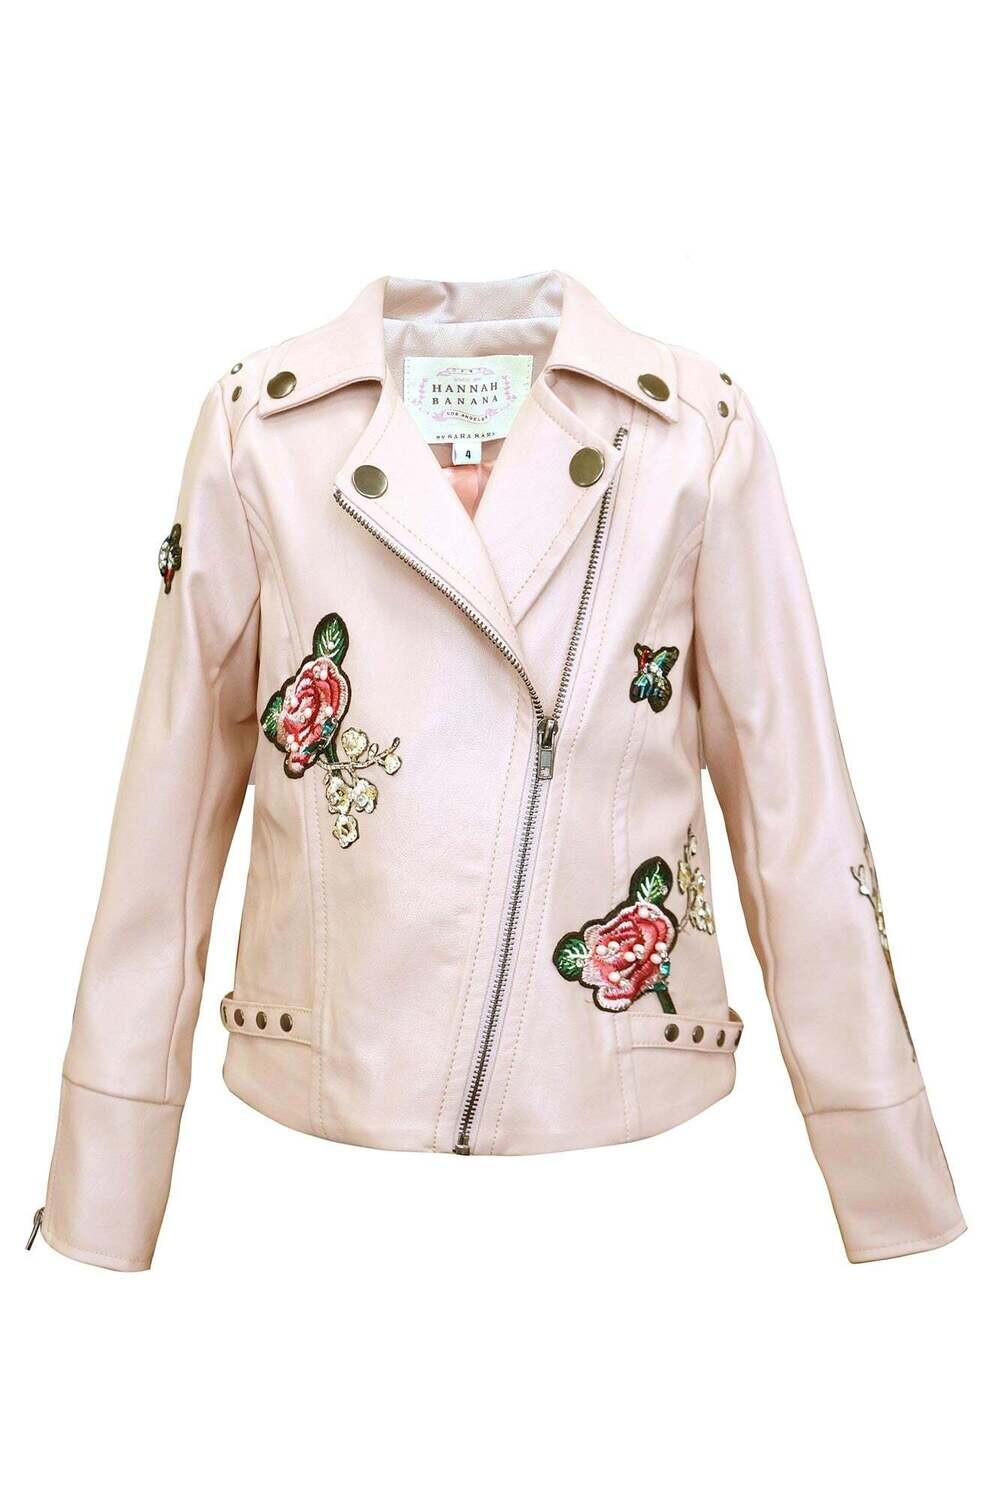 Hannah Banana Floral Patch Faux Leather Jacket